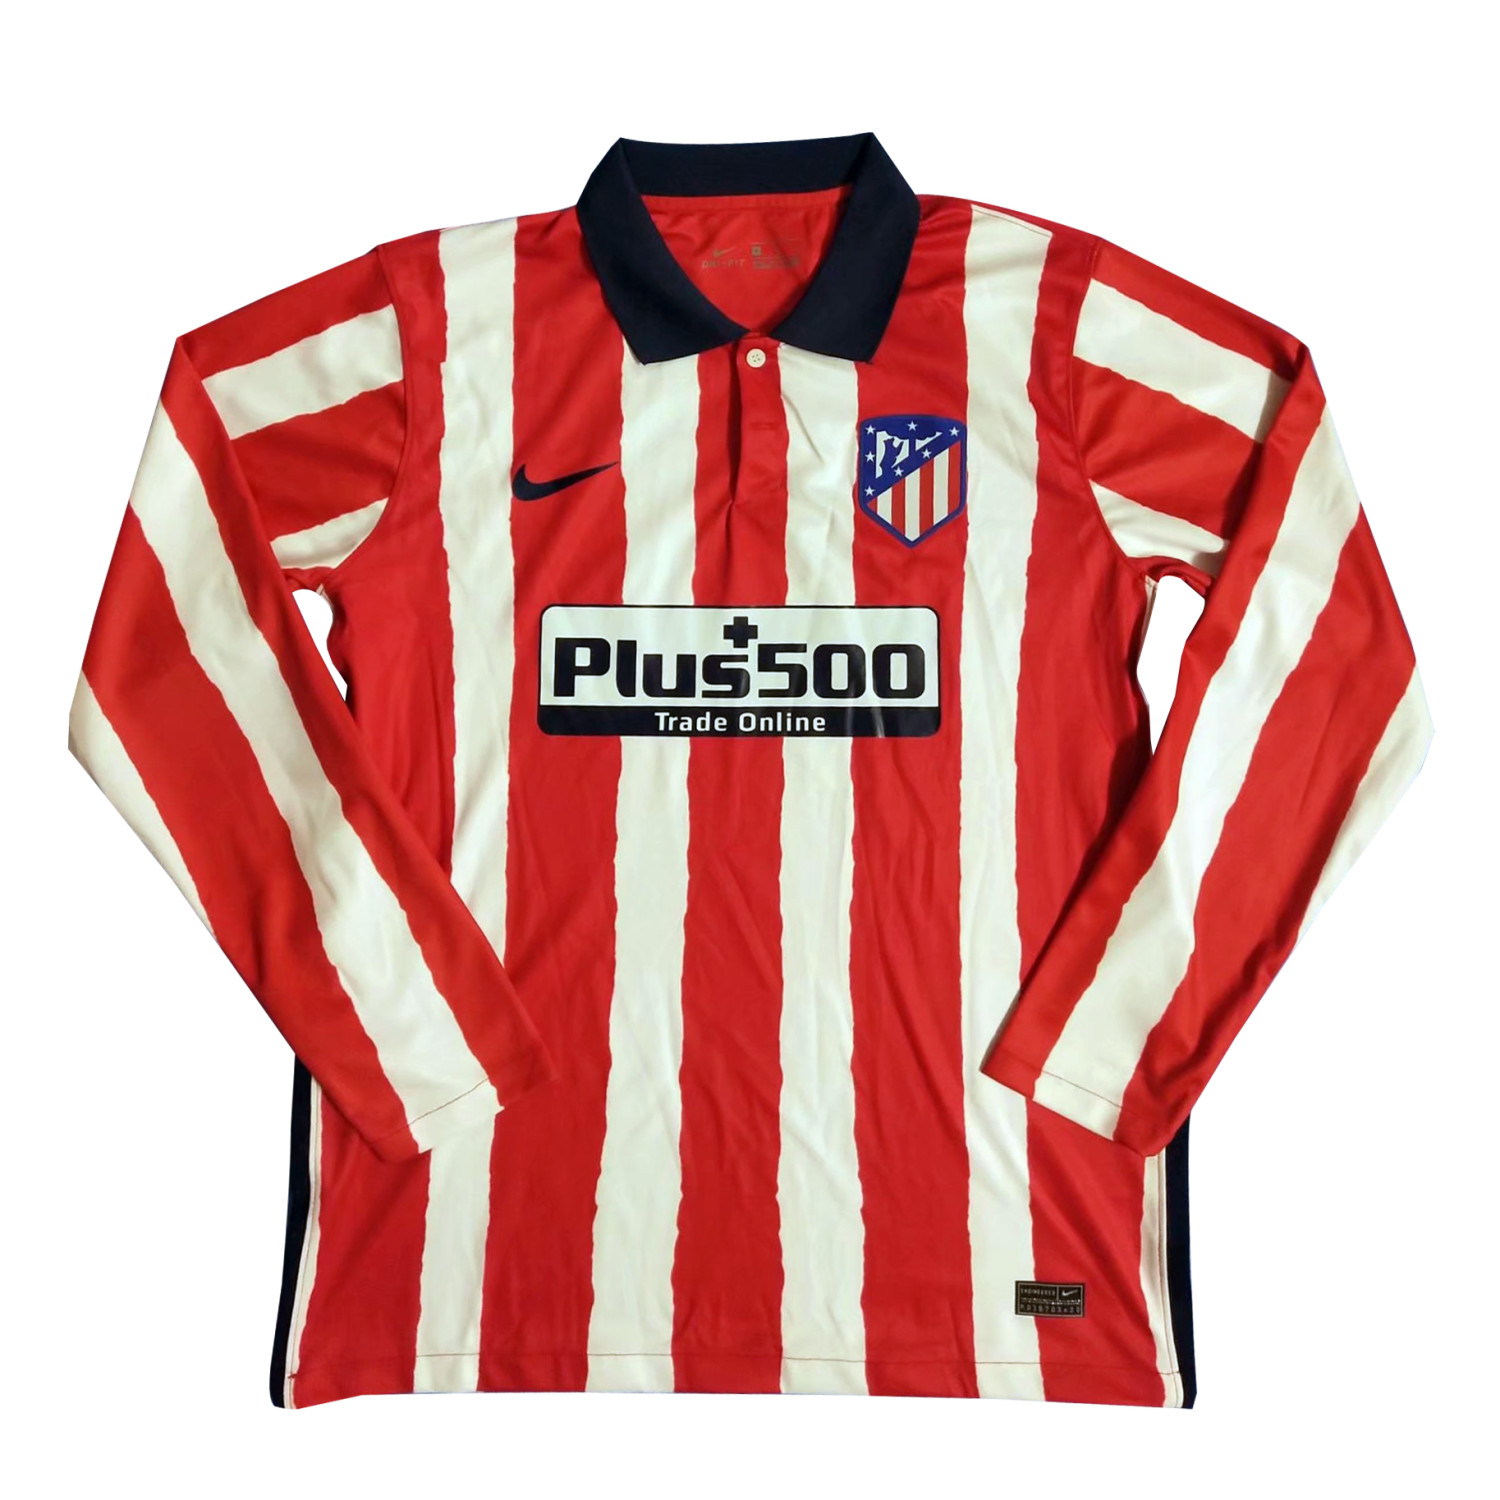 US$ 16.80 - Atletico Madrid Home Jersey Long Sleeve Mens ...